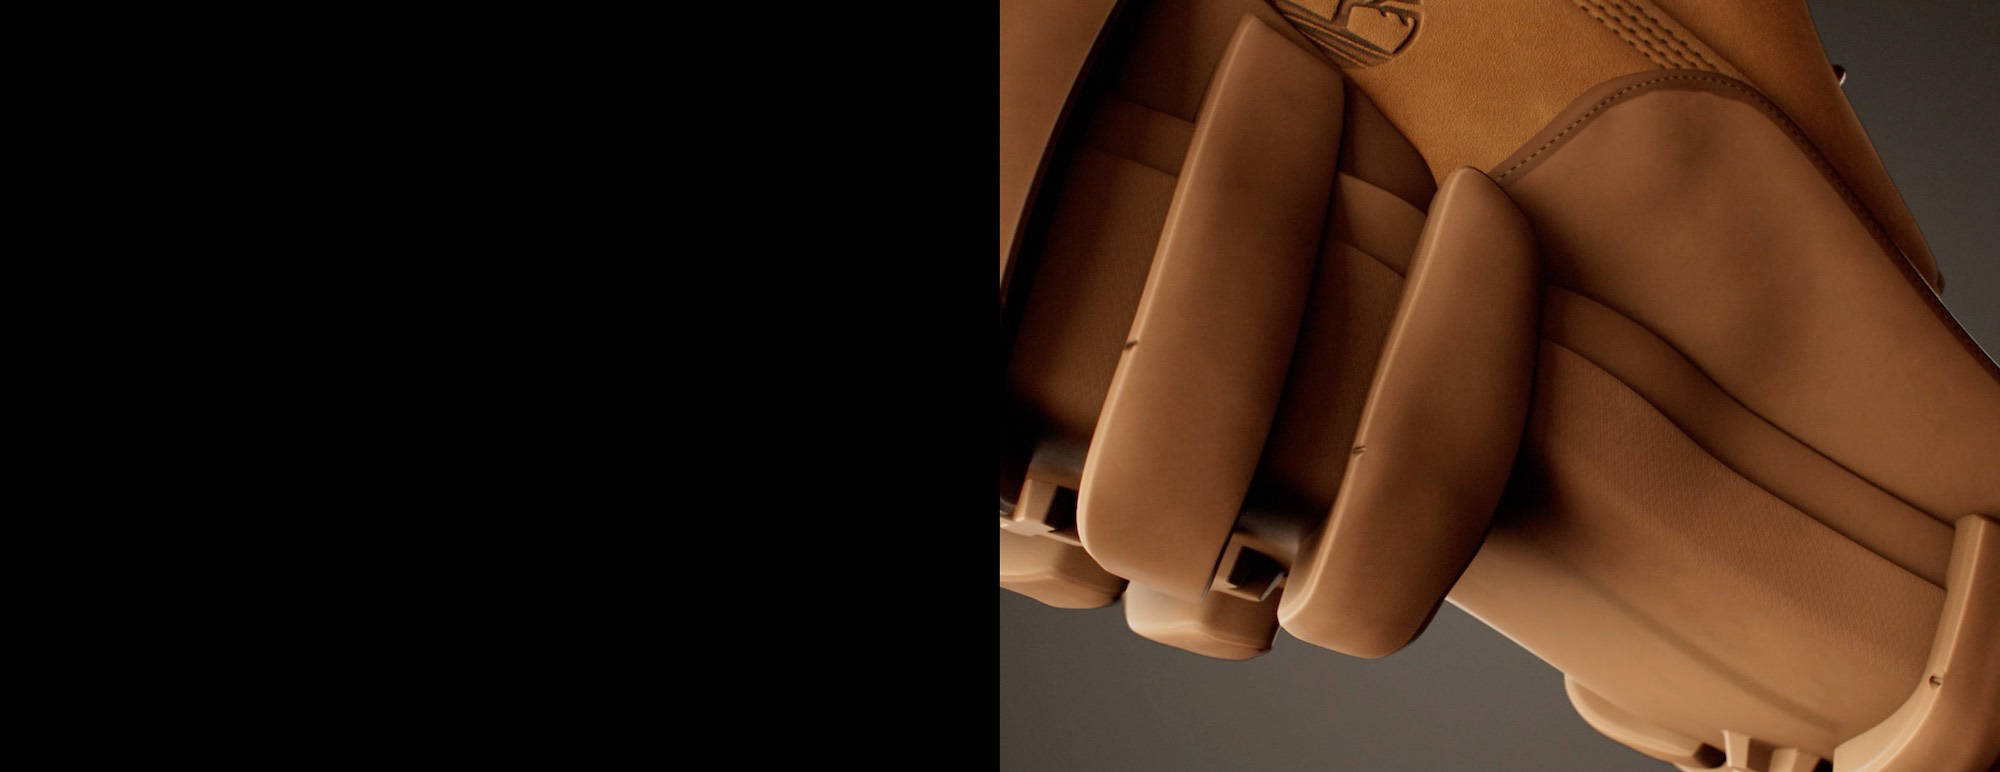 Image of a close-up side angle of a wheat-colored futuristic Timberland boot with outsoles that resemble moon boots.